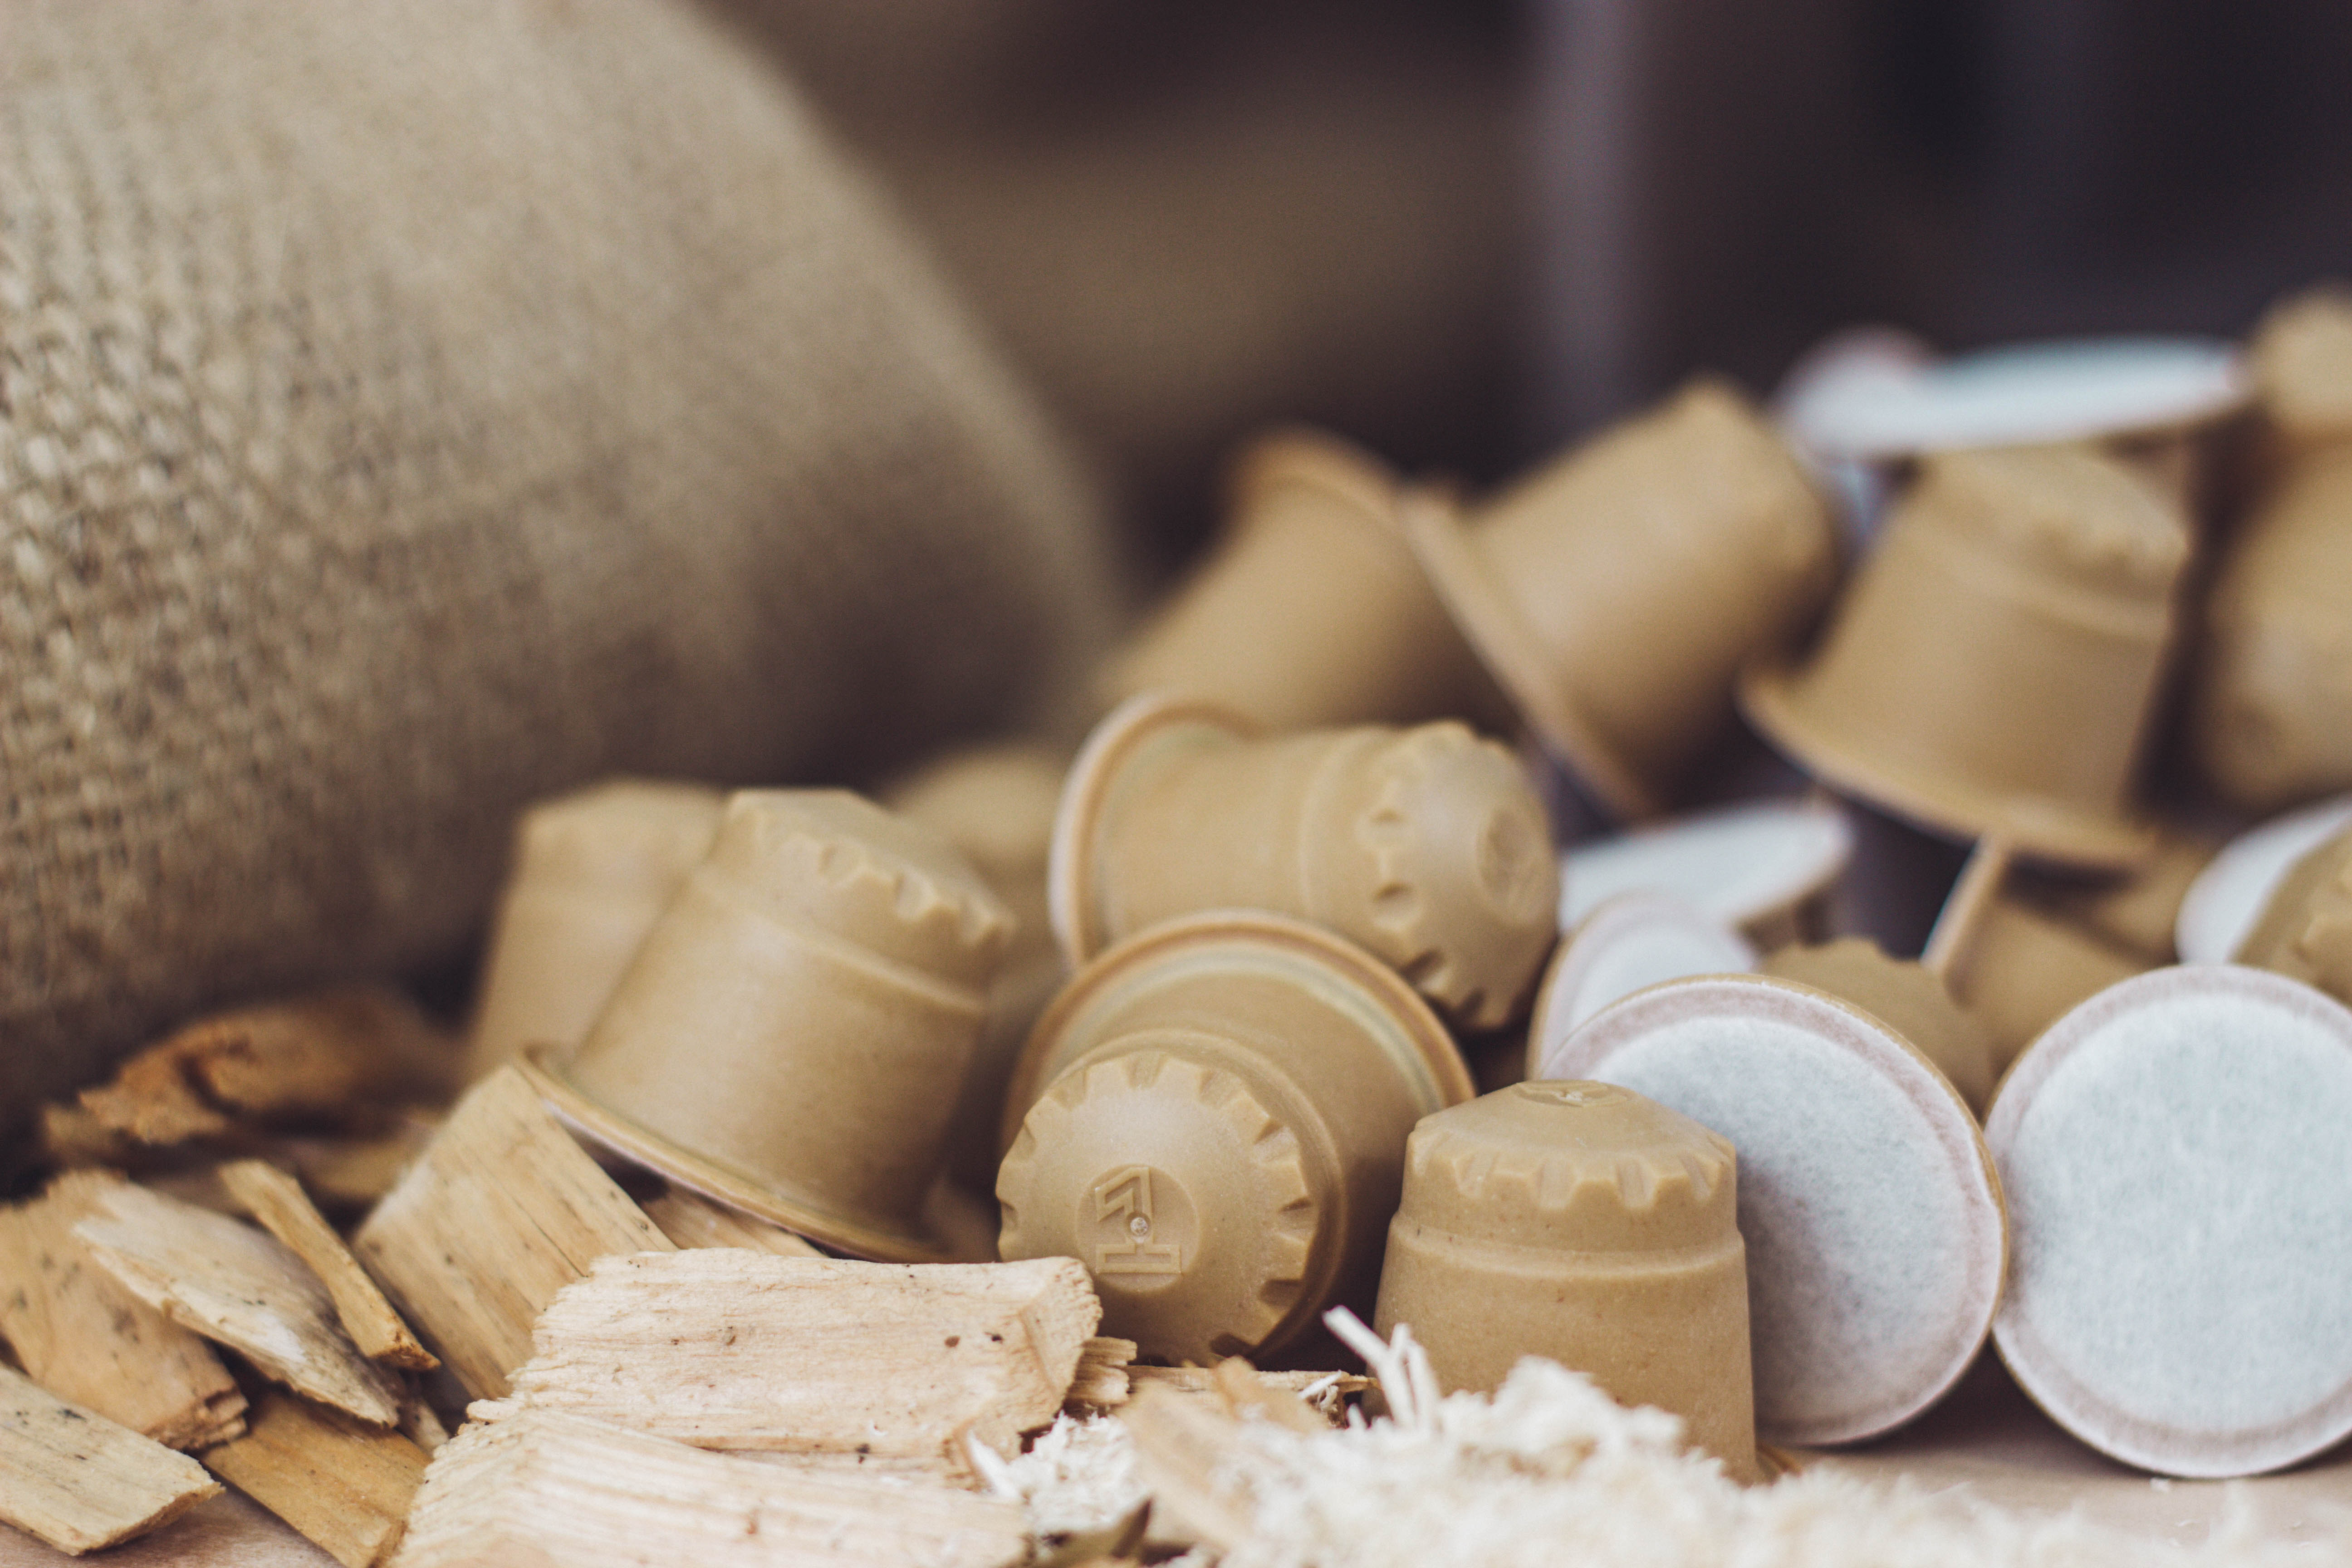 Coffee capsules in front of a jute sack, wood shavings in the foreground.